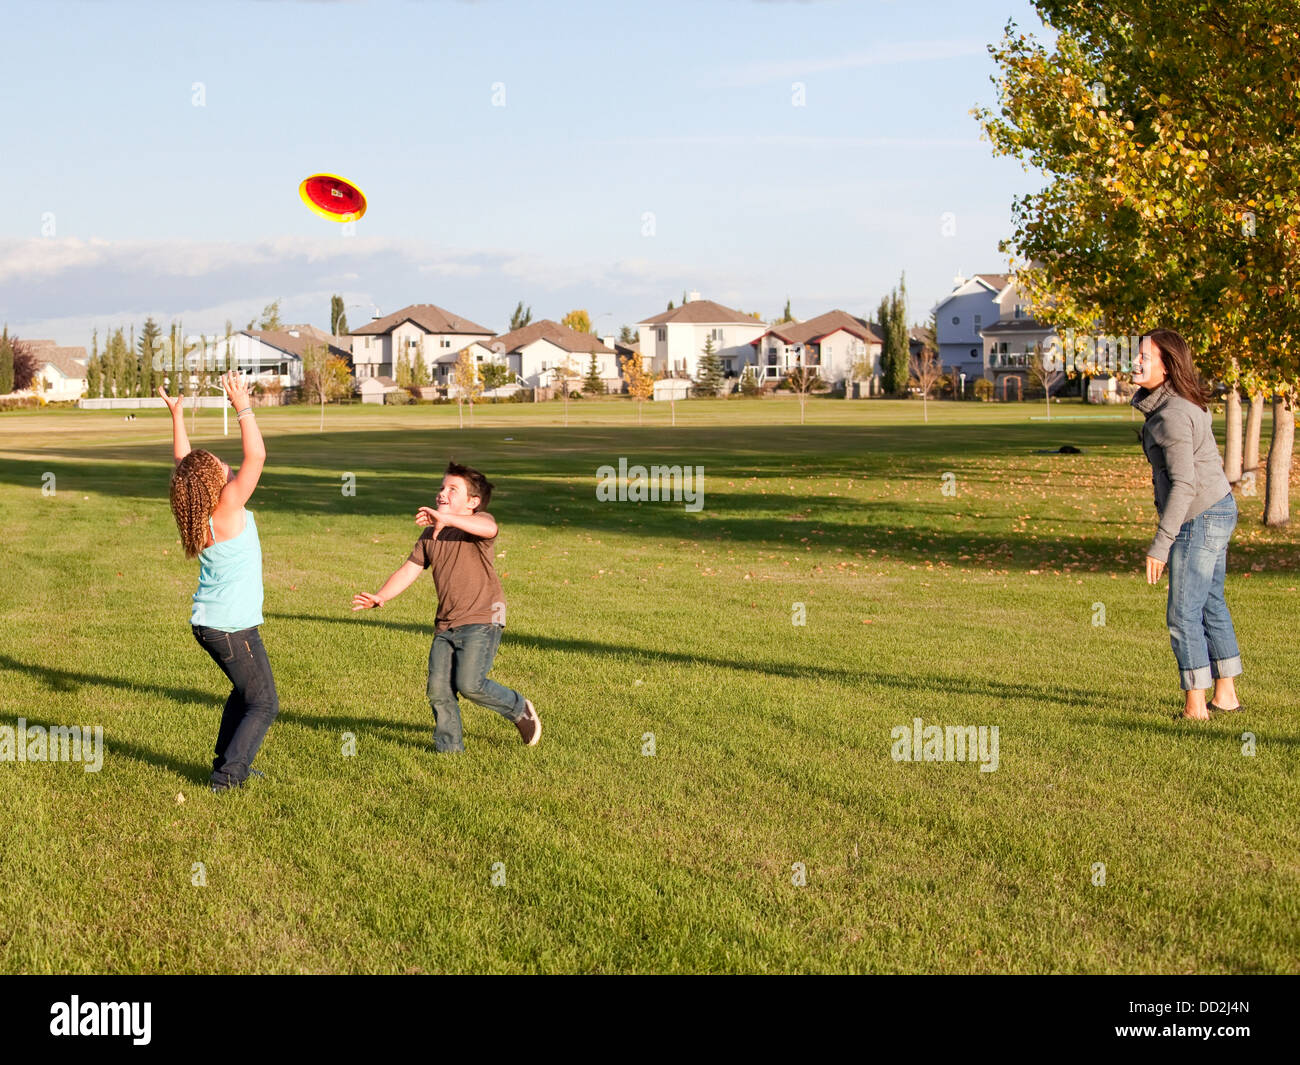 Mother Throwing Flying Disc To Children In A Park; Beaumont, Alberta, Canada Stock Photo